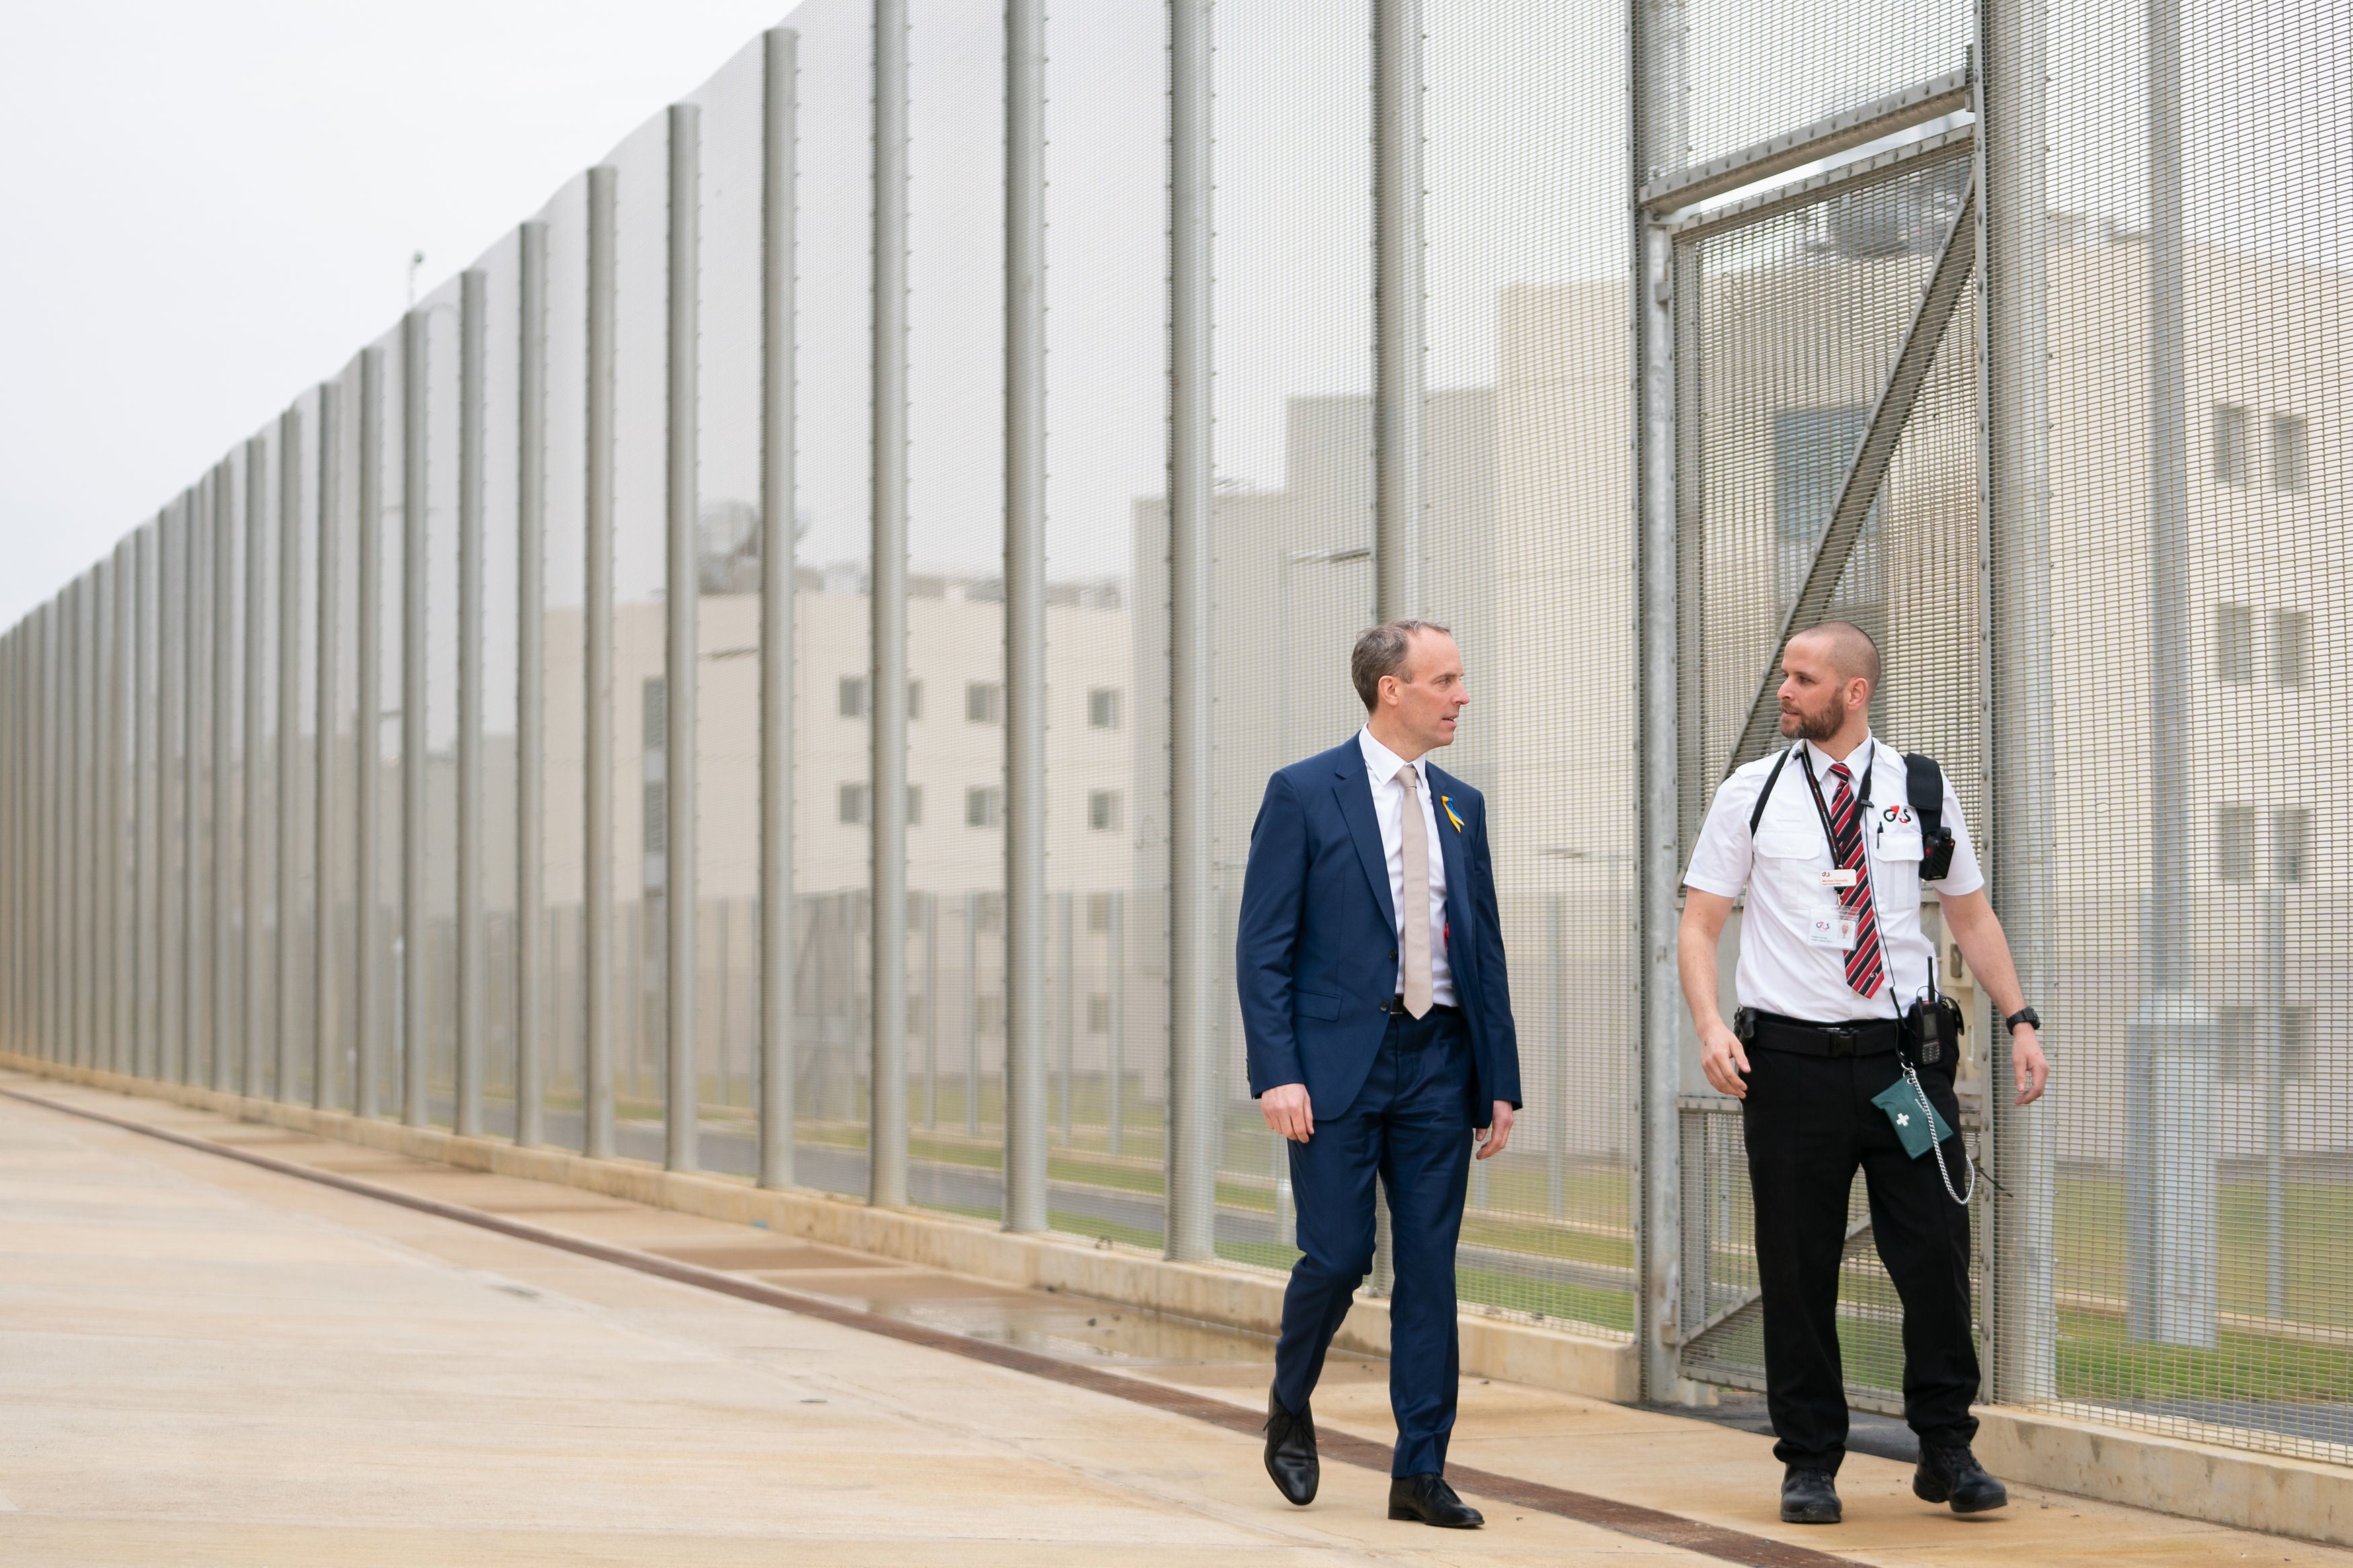 Dominic Raab with a prison officer at the opening of category C prison HMP Five Wells in Wellingborough (Joe Giddens/PA)